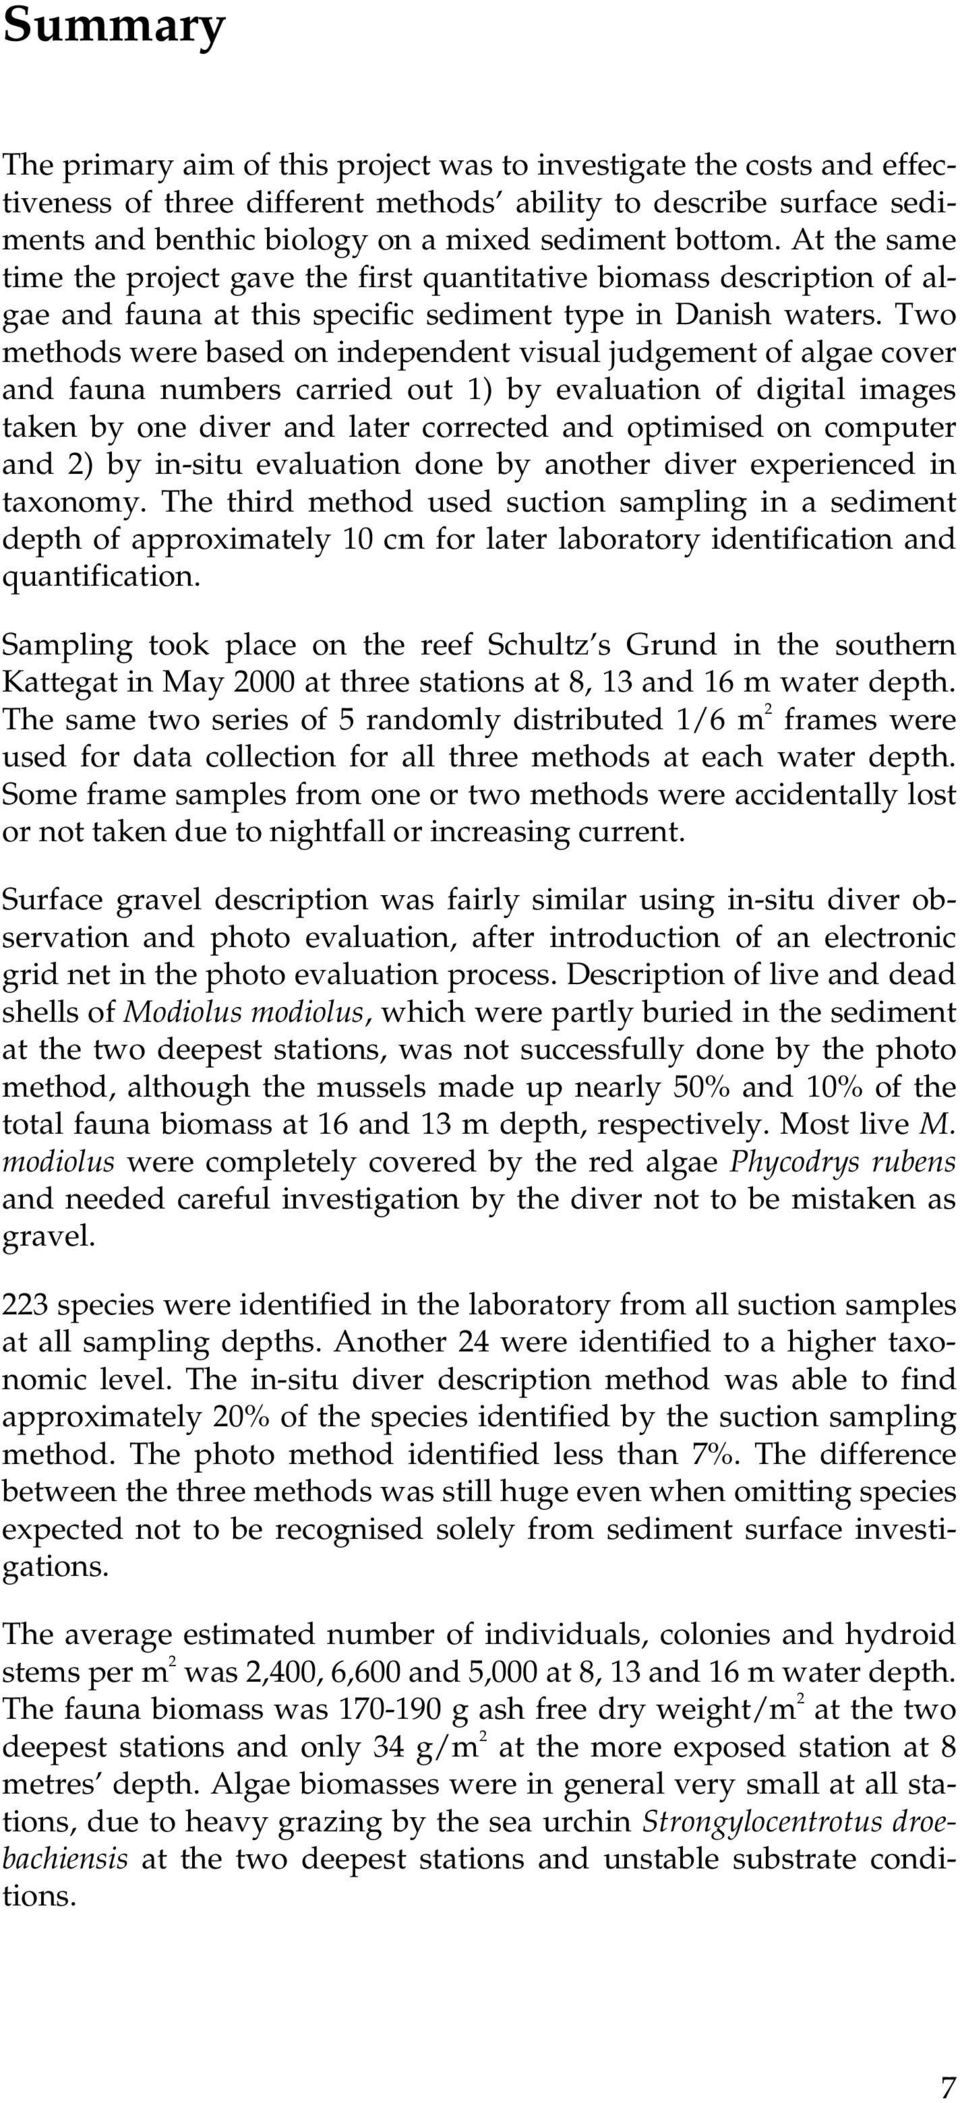 Two methods were based on independent visual judgement of algae cover and fauna numbers carried out 1) by evaluation of digital images taken by one diver and later corrected and optimised on computer